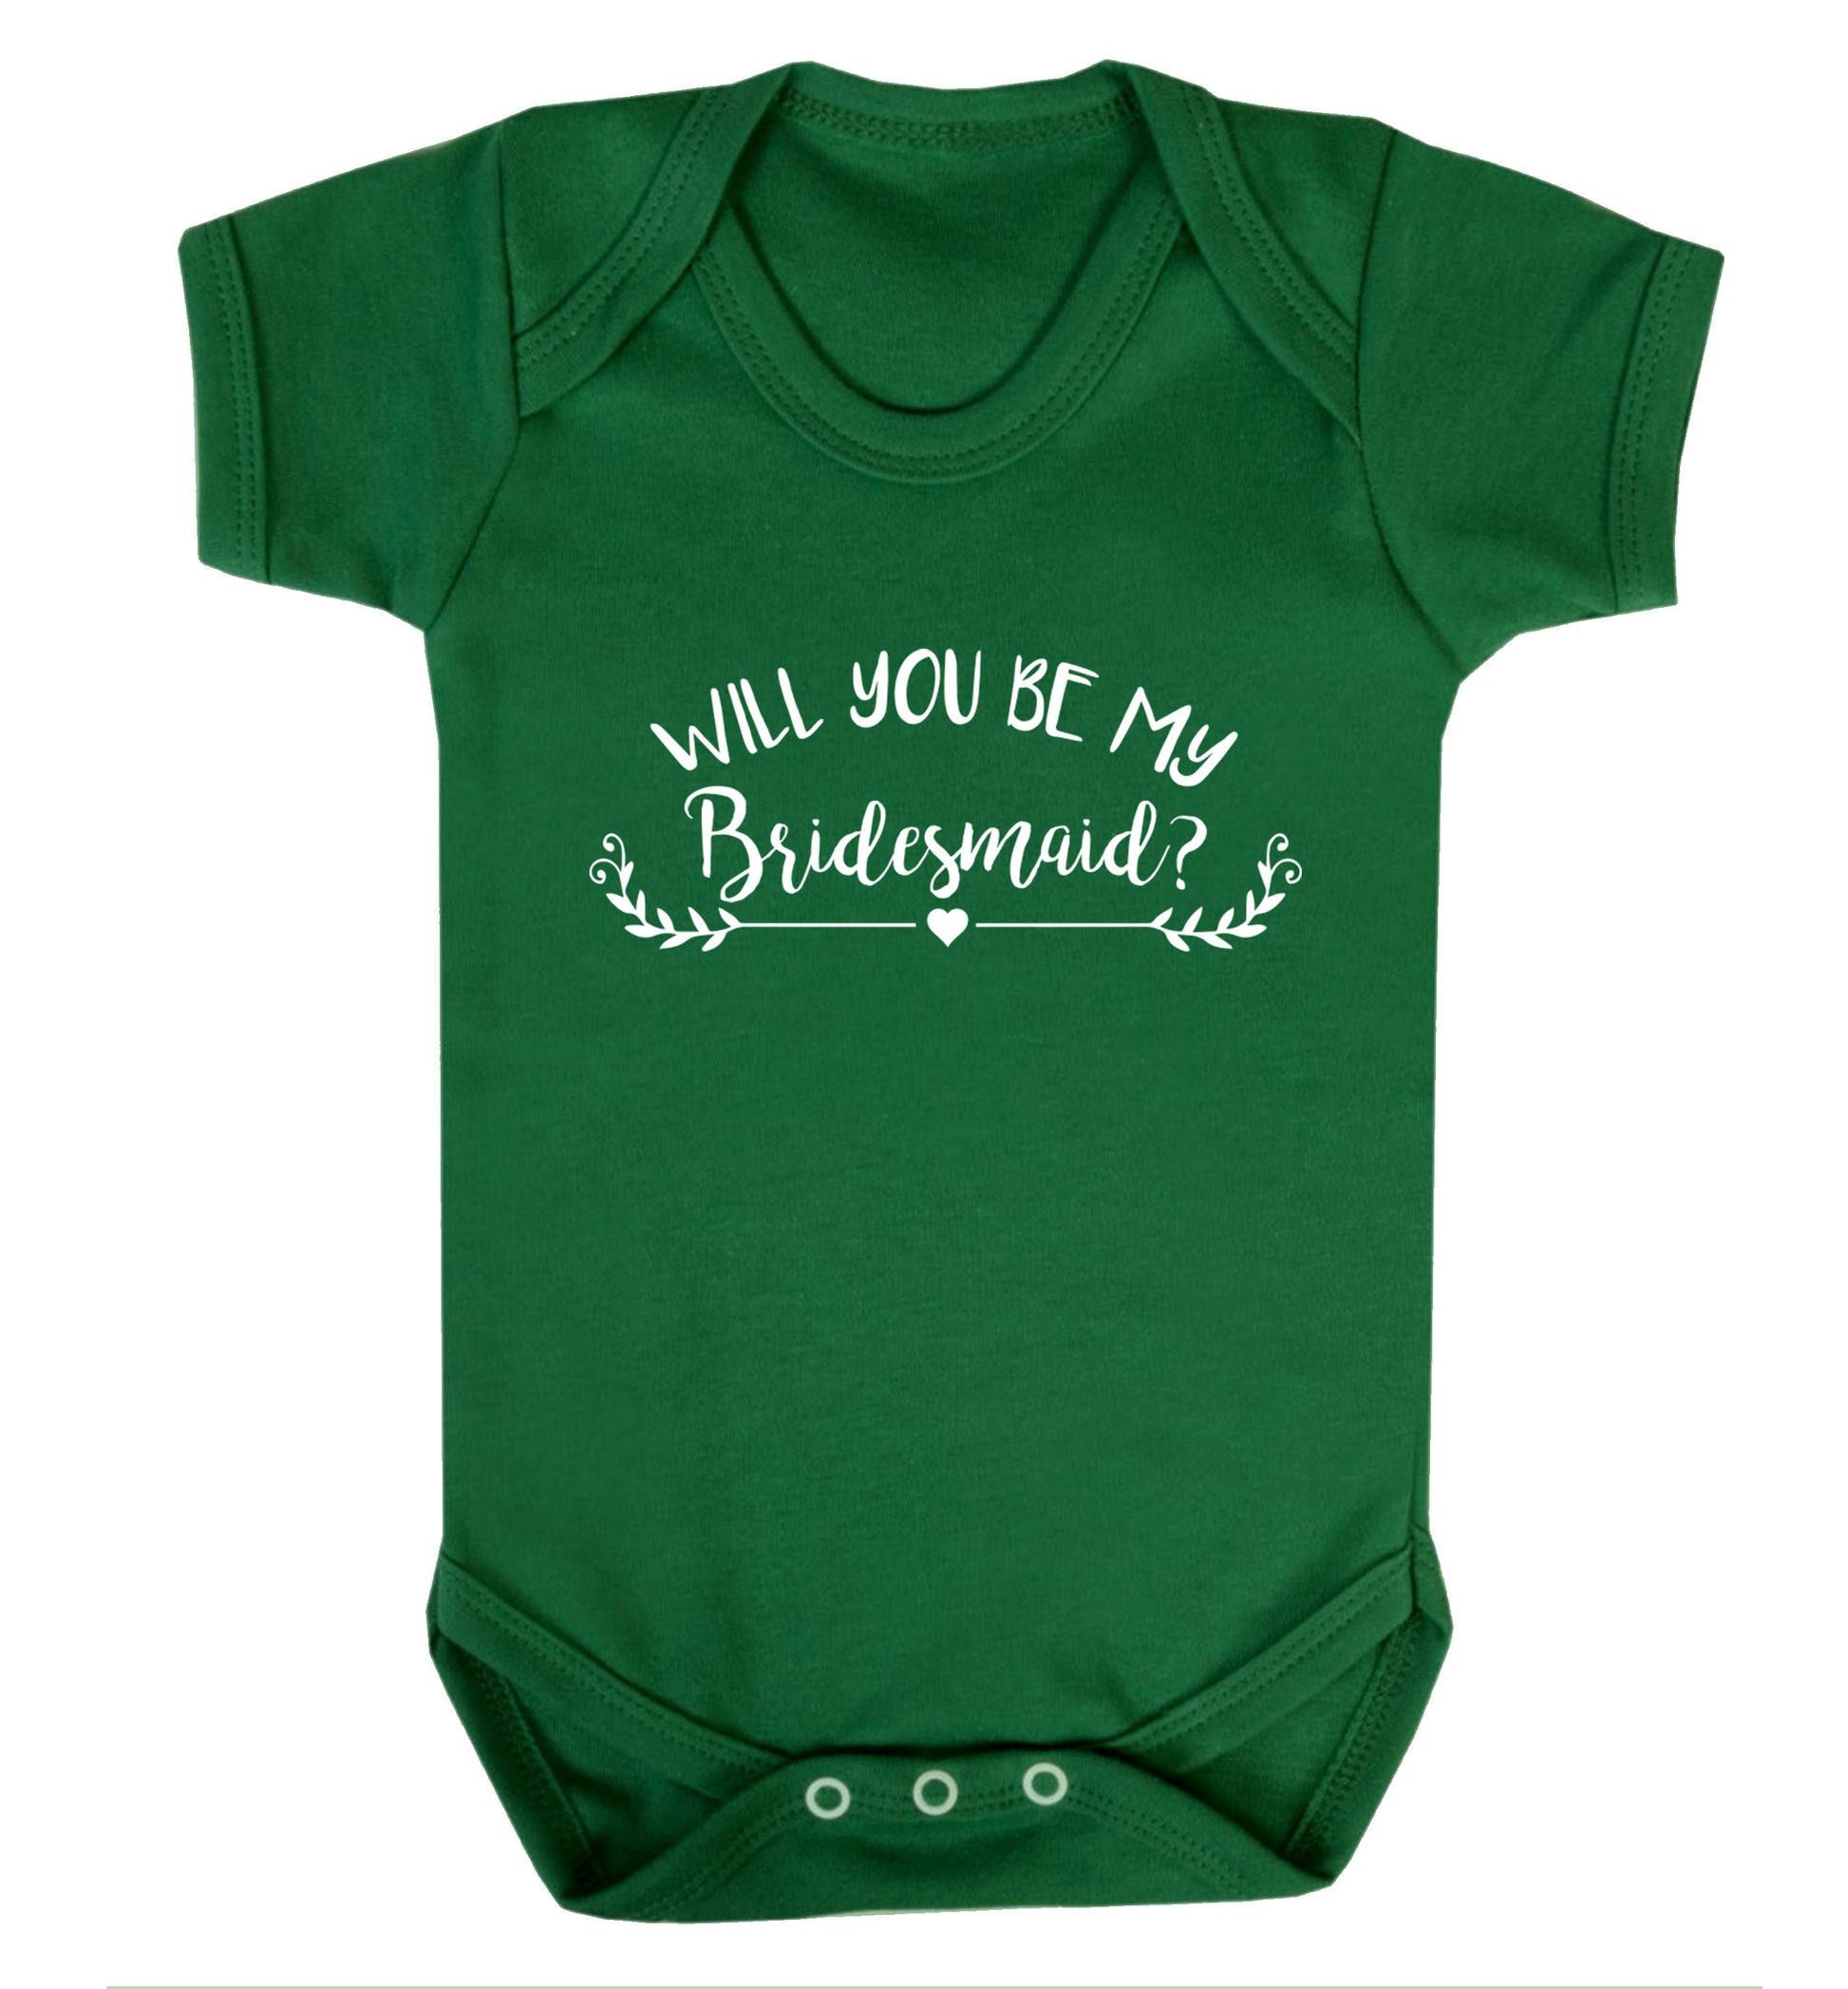 Will you be my bridesmaid? Baby Vest green 18-24 months